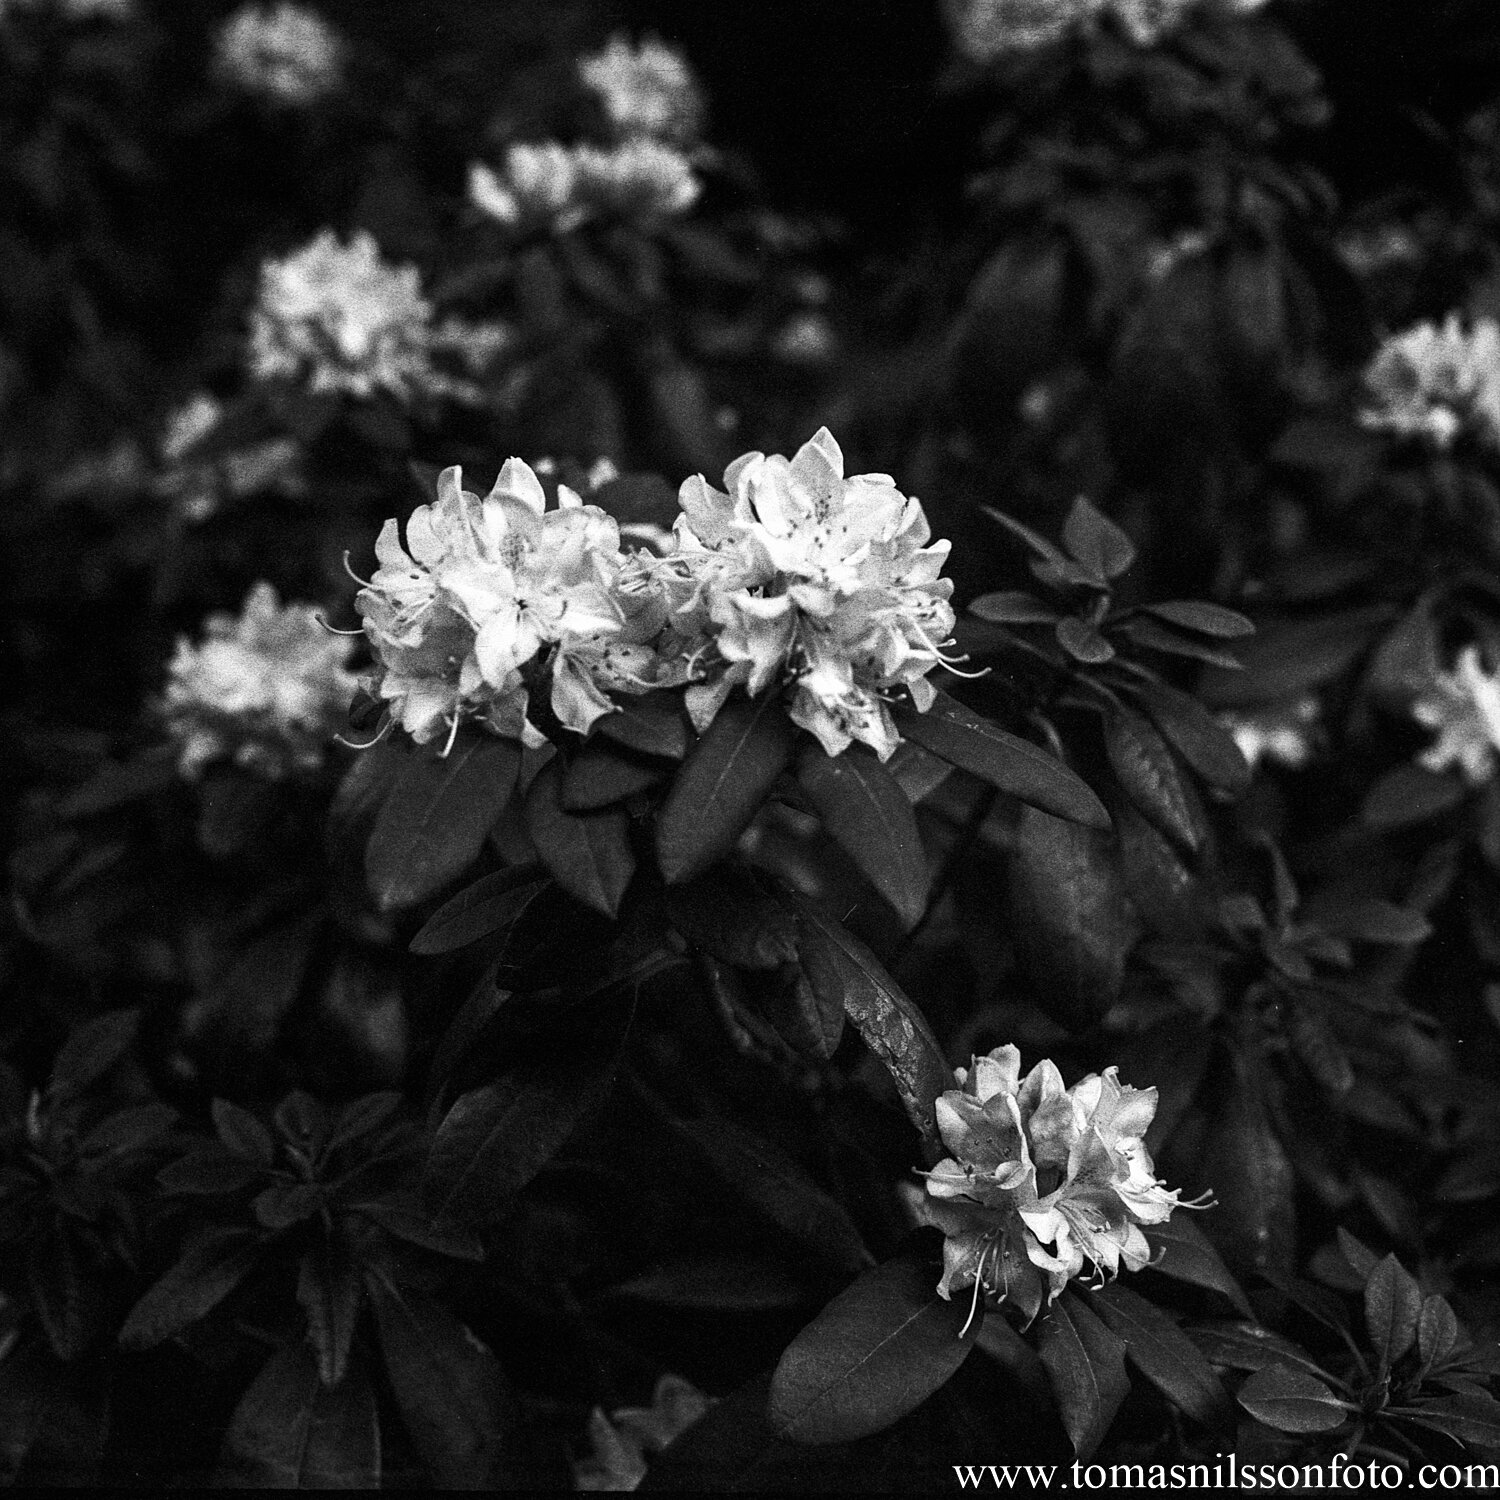 Day 198 - July 16: Rhododendrons